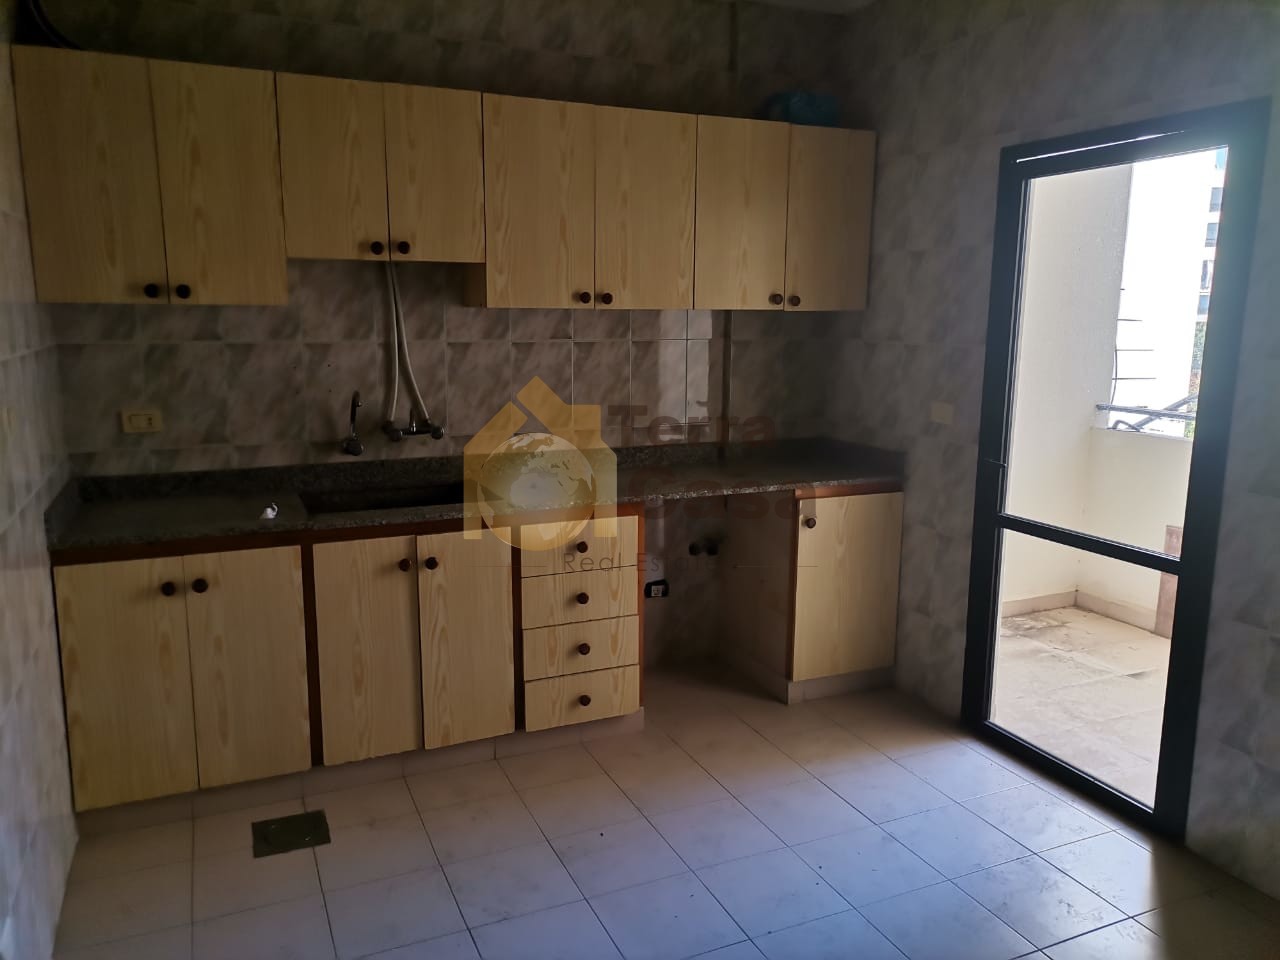 Brand new apartment nice location for rent .Ref#2744